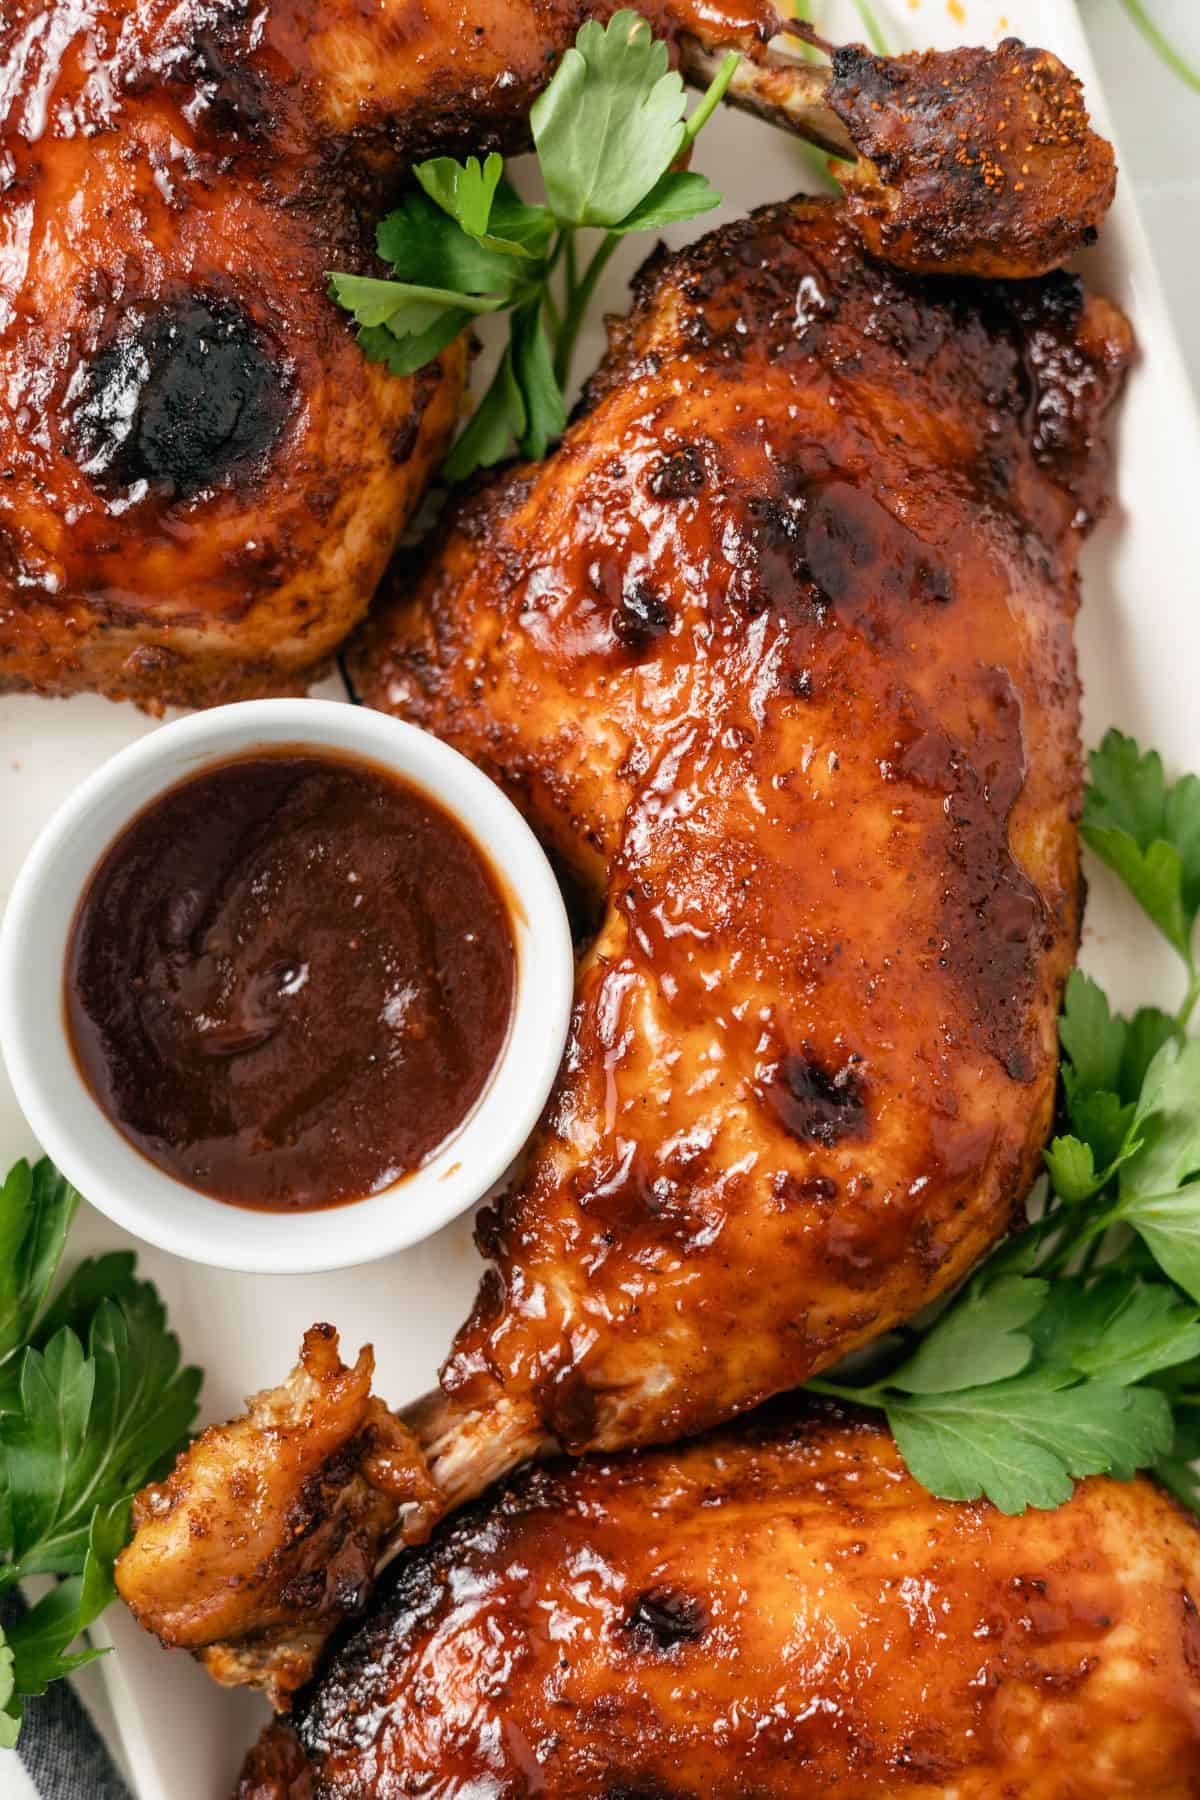 Succulent BBQ chicken quarters cooked in a slow cooker, coated in flavorful barbecue sauce, accompanied by a side of BBQ dip and garnished with fresh parsley.